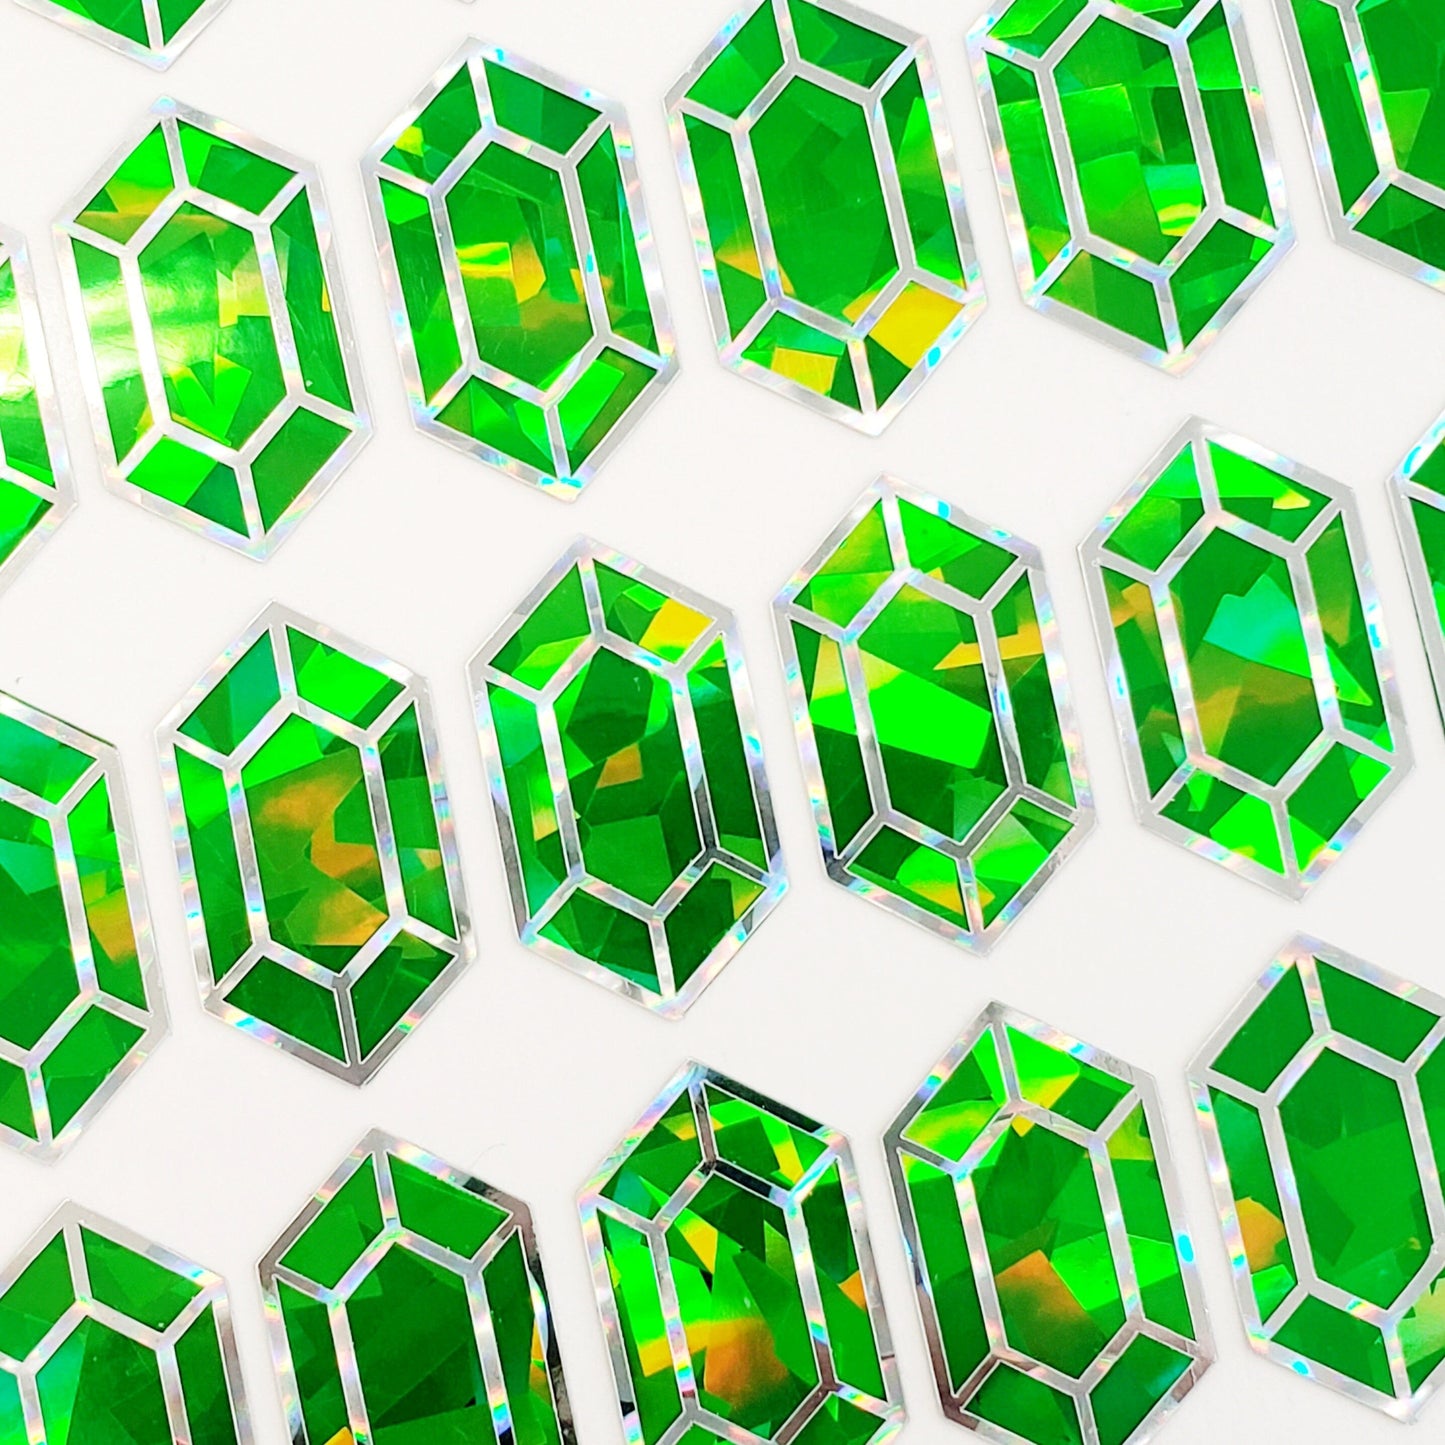 Light Green Jewel Stickers, set of 36 sparkly green peridot faux rupee gemstone stickers for August birthday, Virgo zodiac gift.